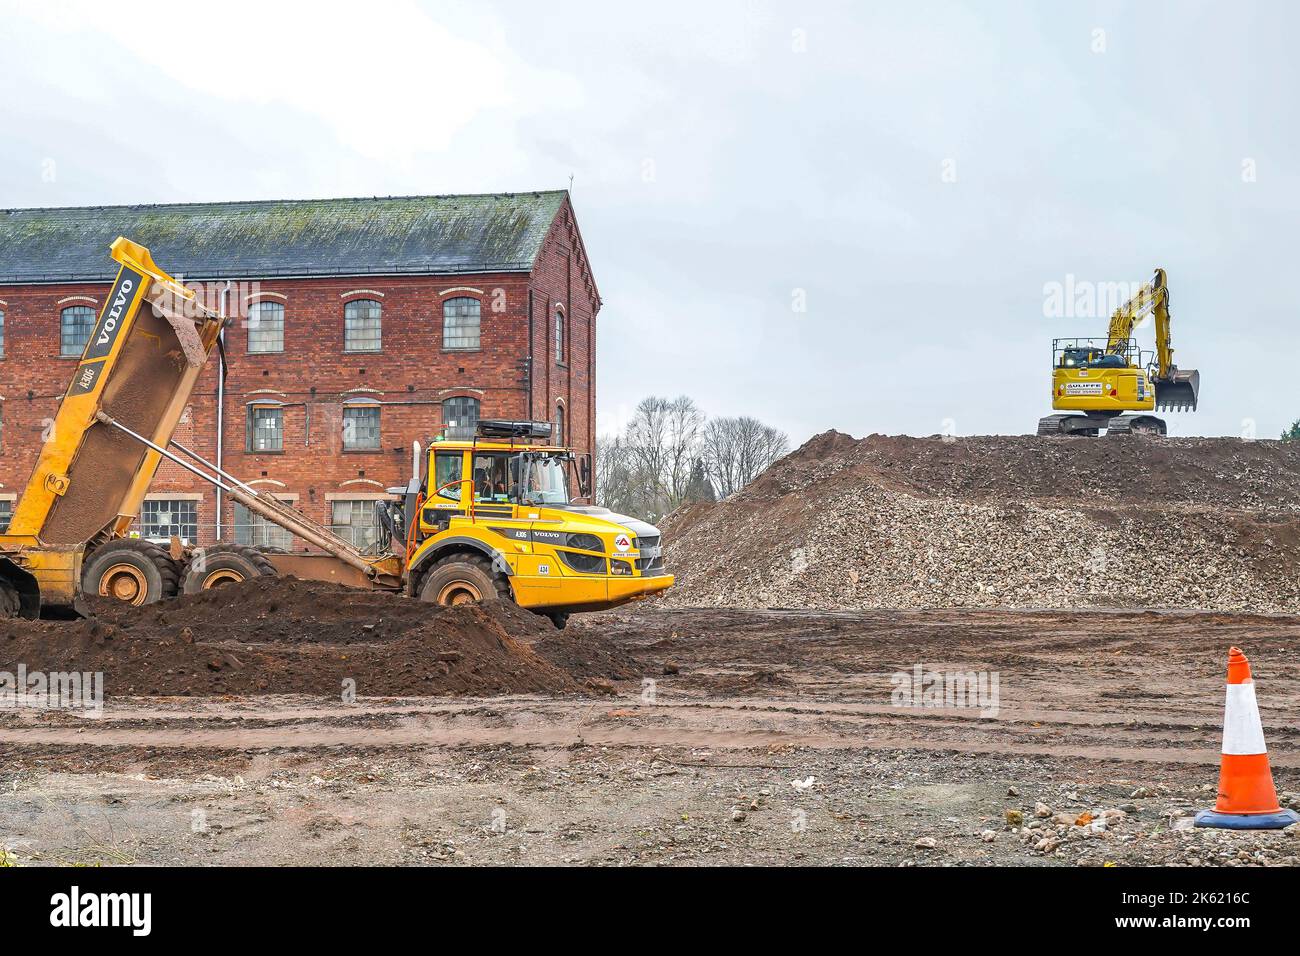 Heavy construction equipment working in an urban rejuvenation project on a brownfield site. Stock Photo